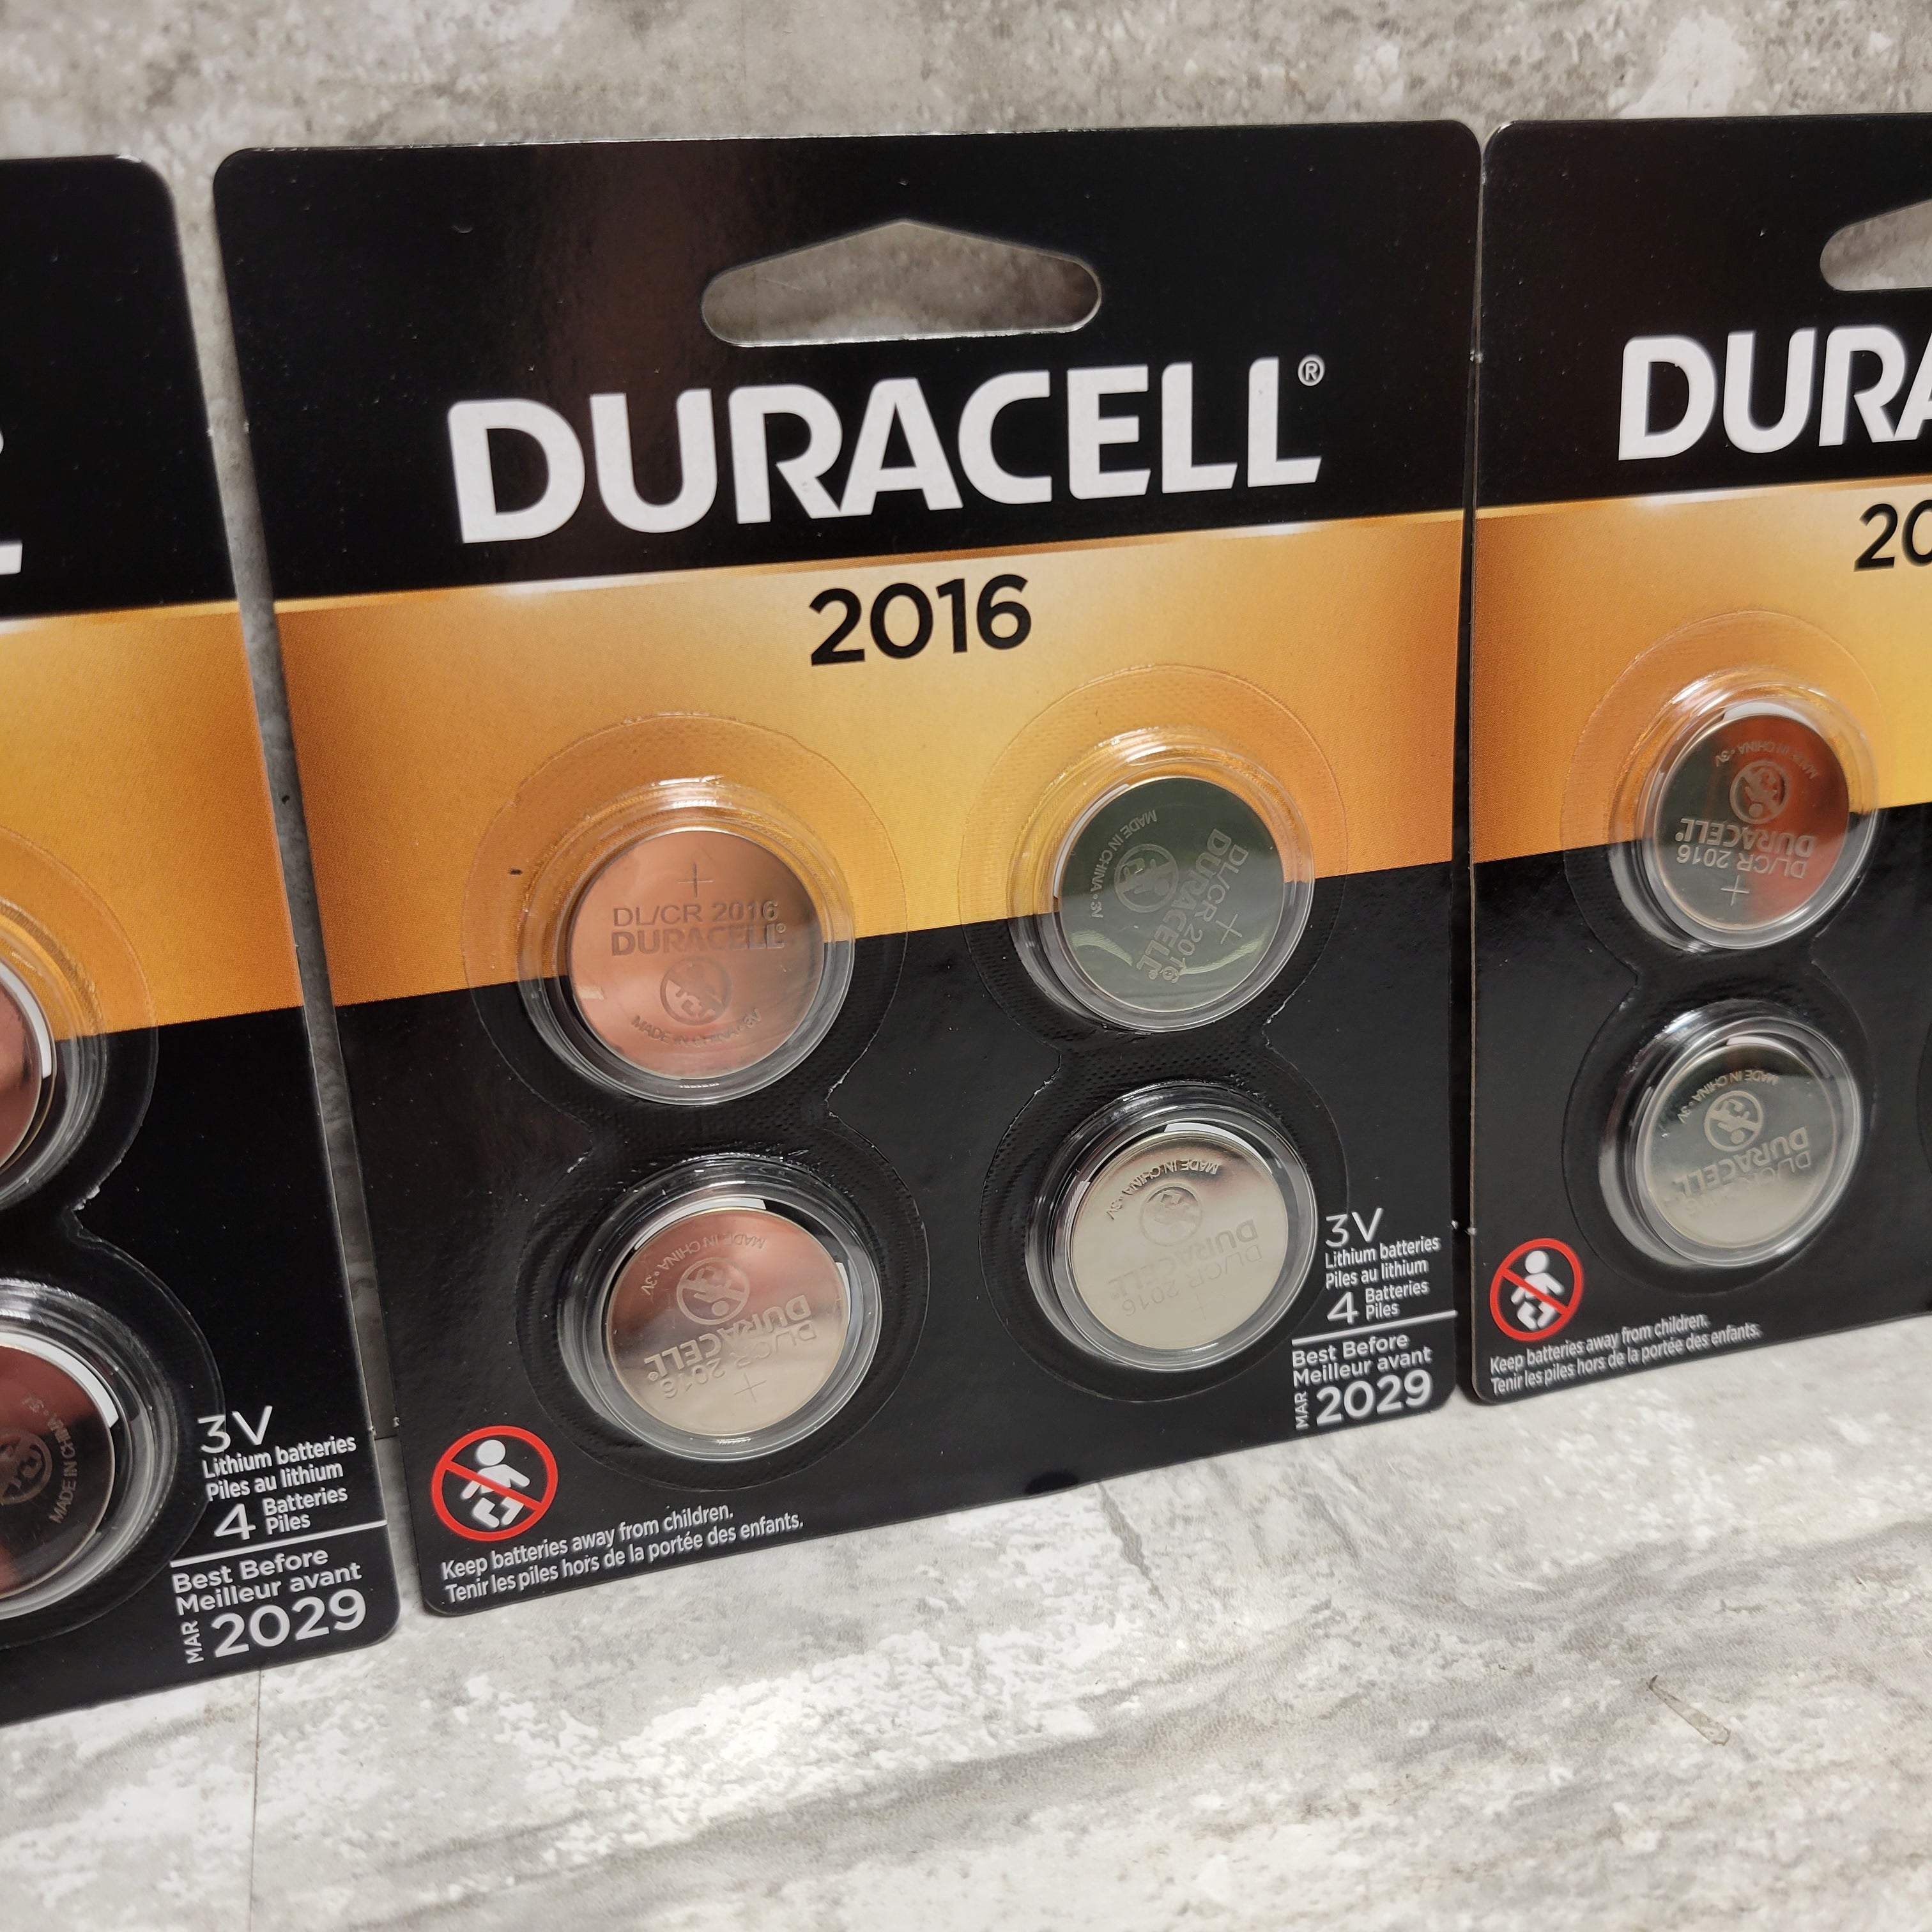 Duracell CR2016 3V Lithium Coin Cell Battery, 3 Packs of 4 (8117136589038)